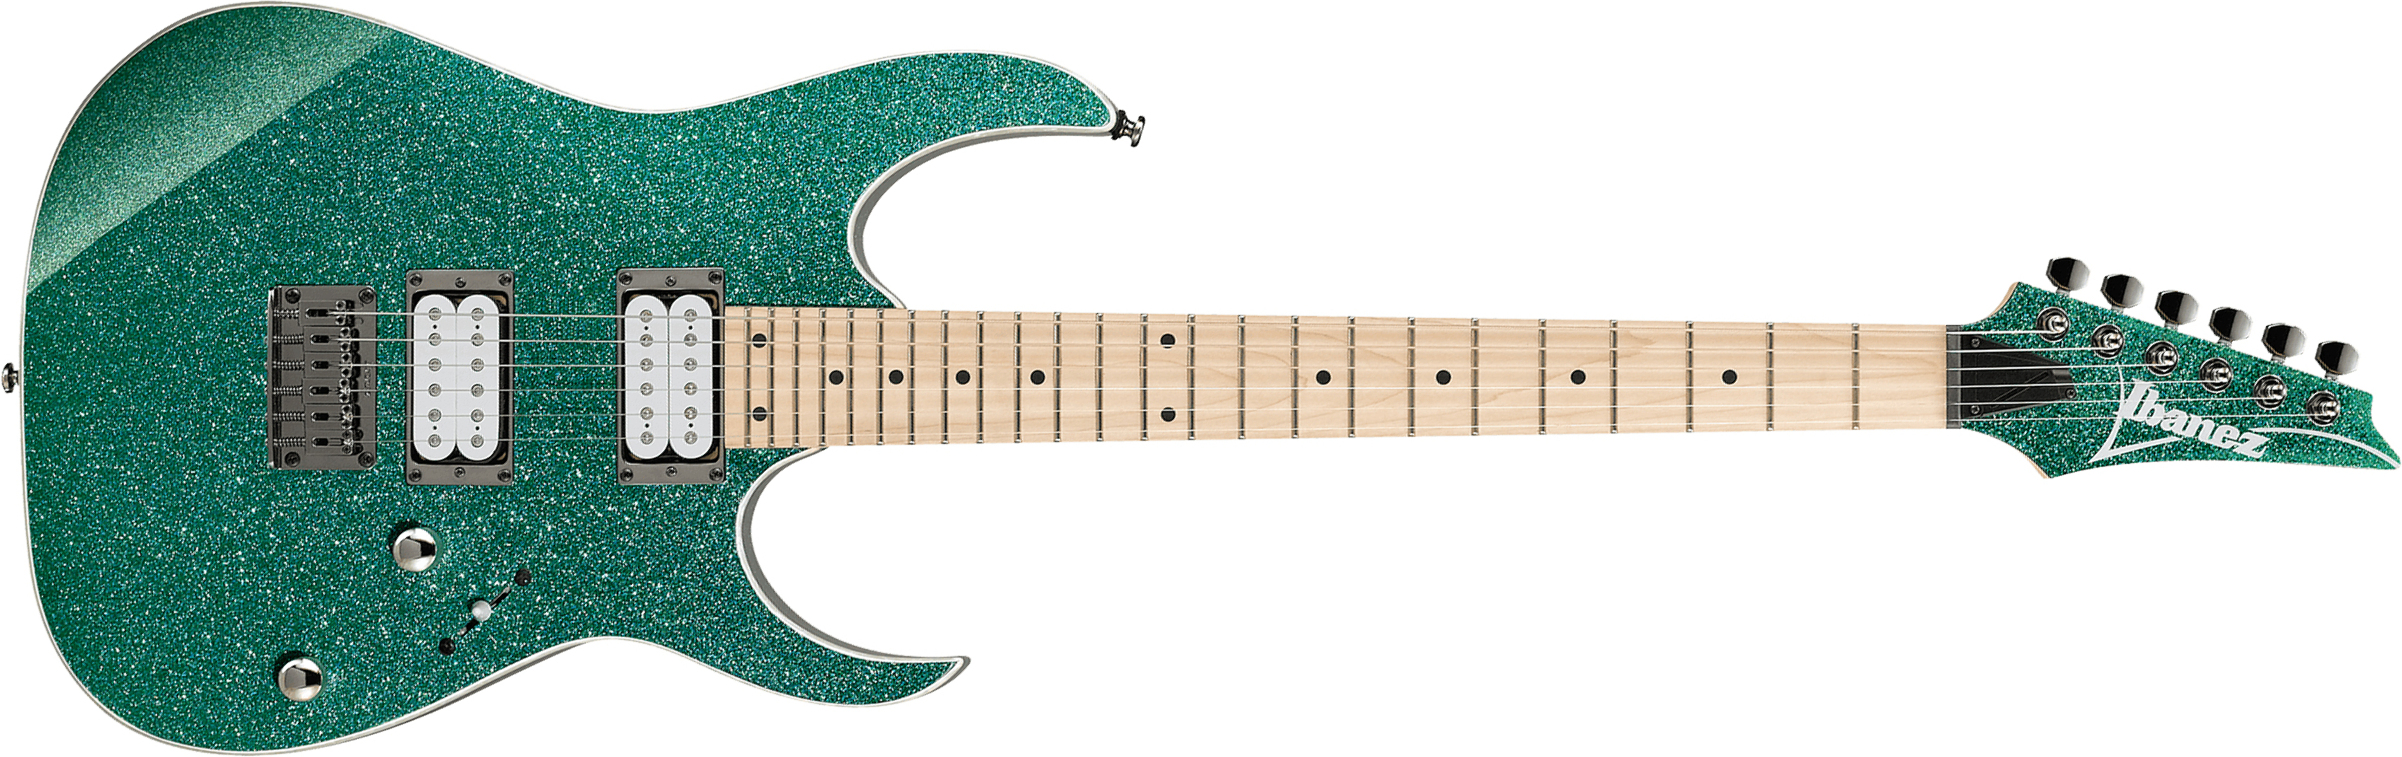 Ibanez Rg421msp Tsp Standard Ht Hh Mn - Turquoise Sparkle - E-Gitarre in Str-Form - Main picture